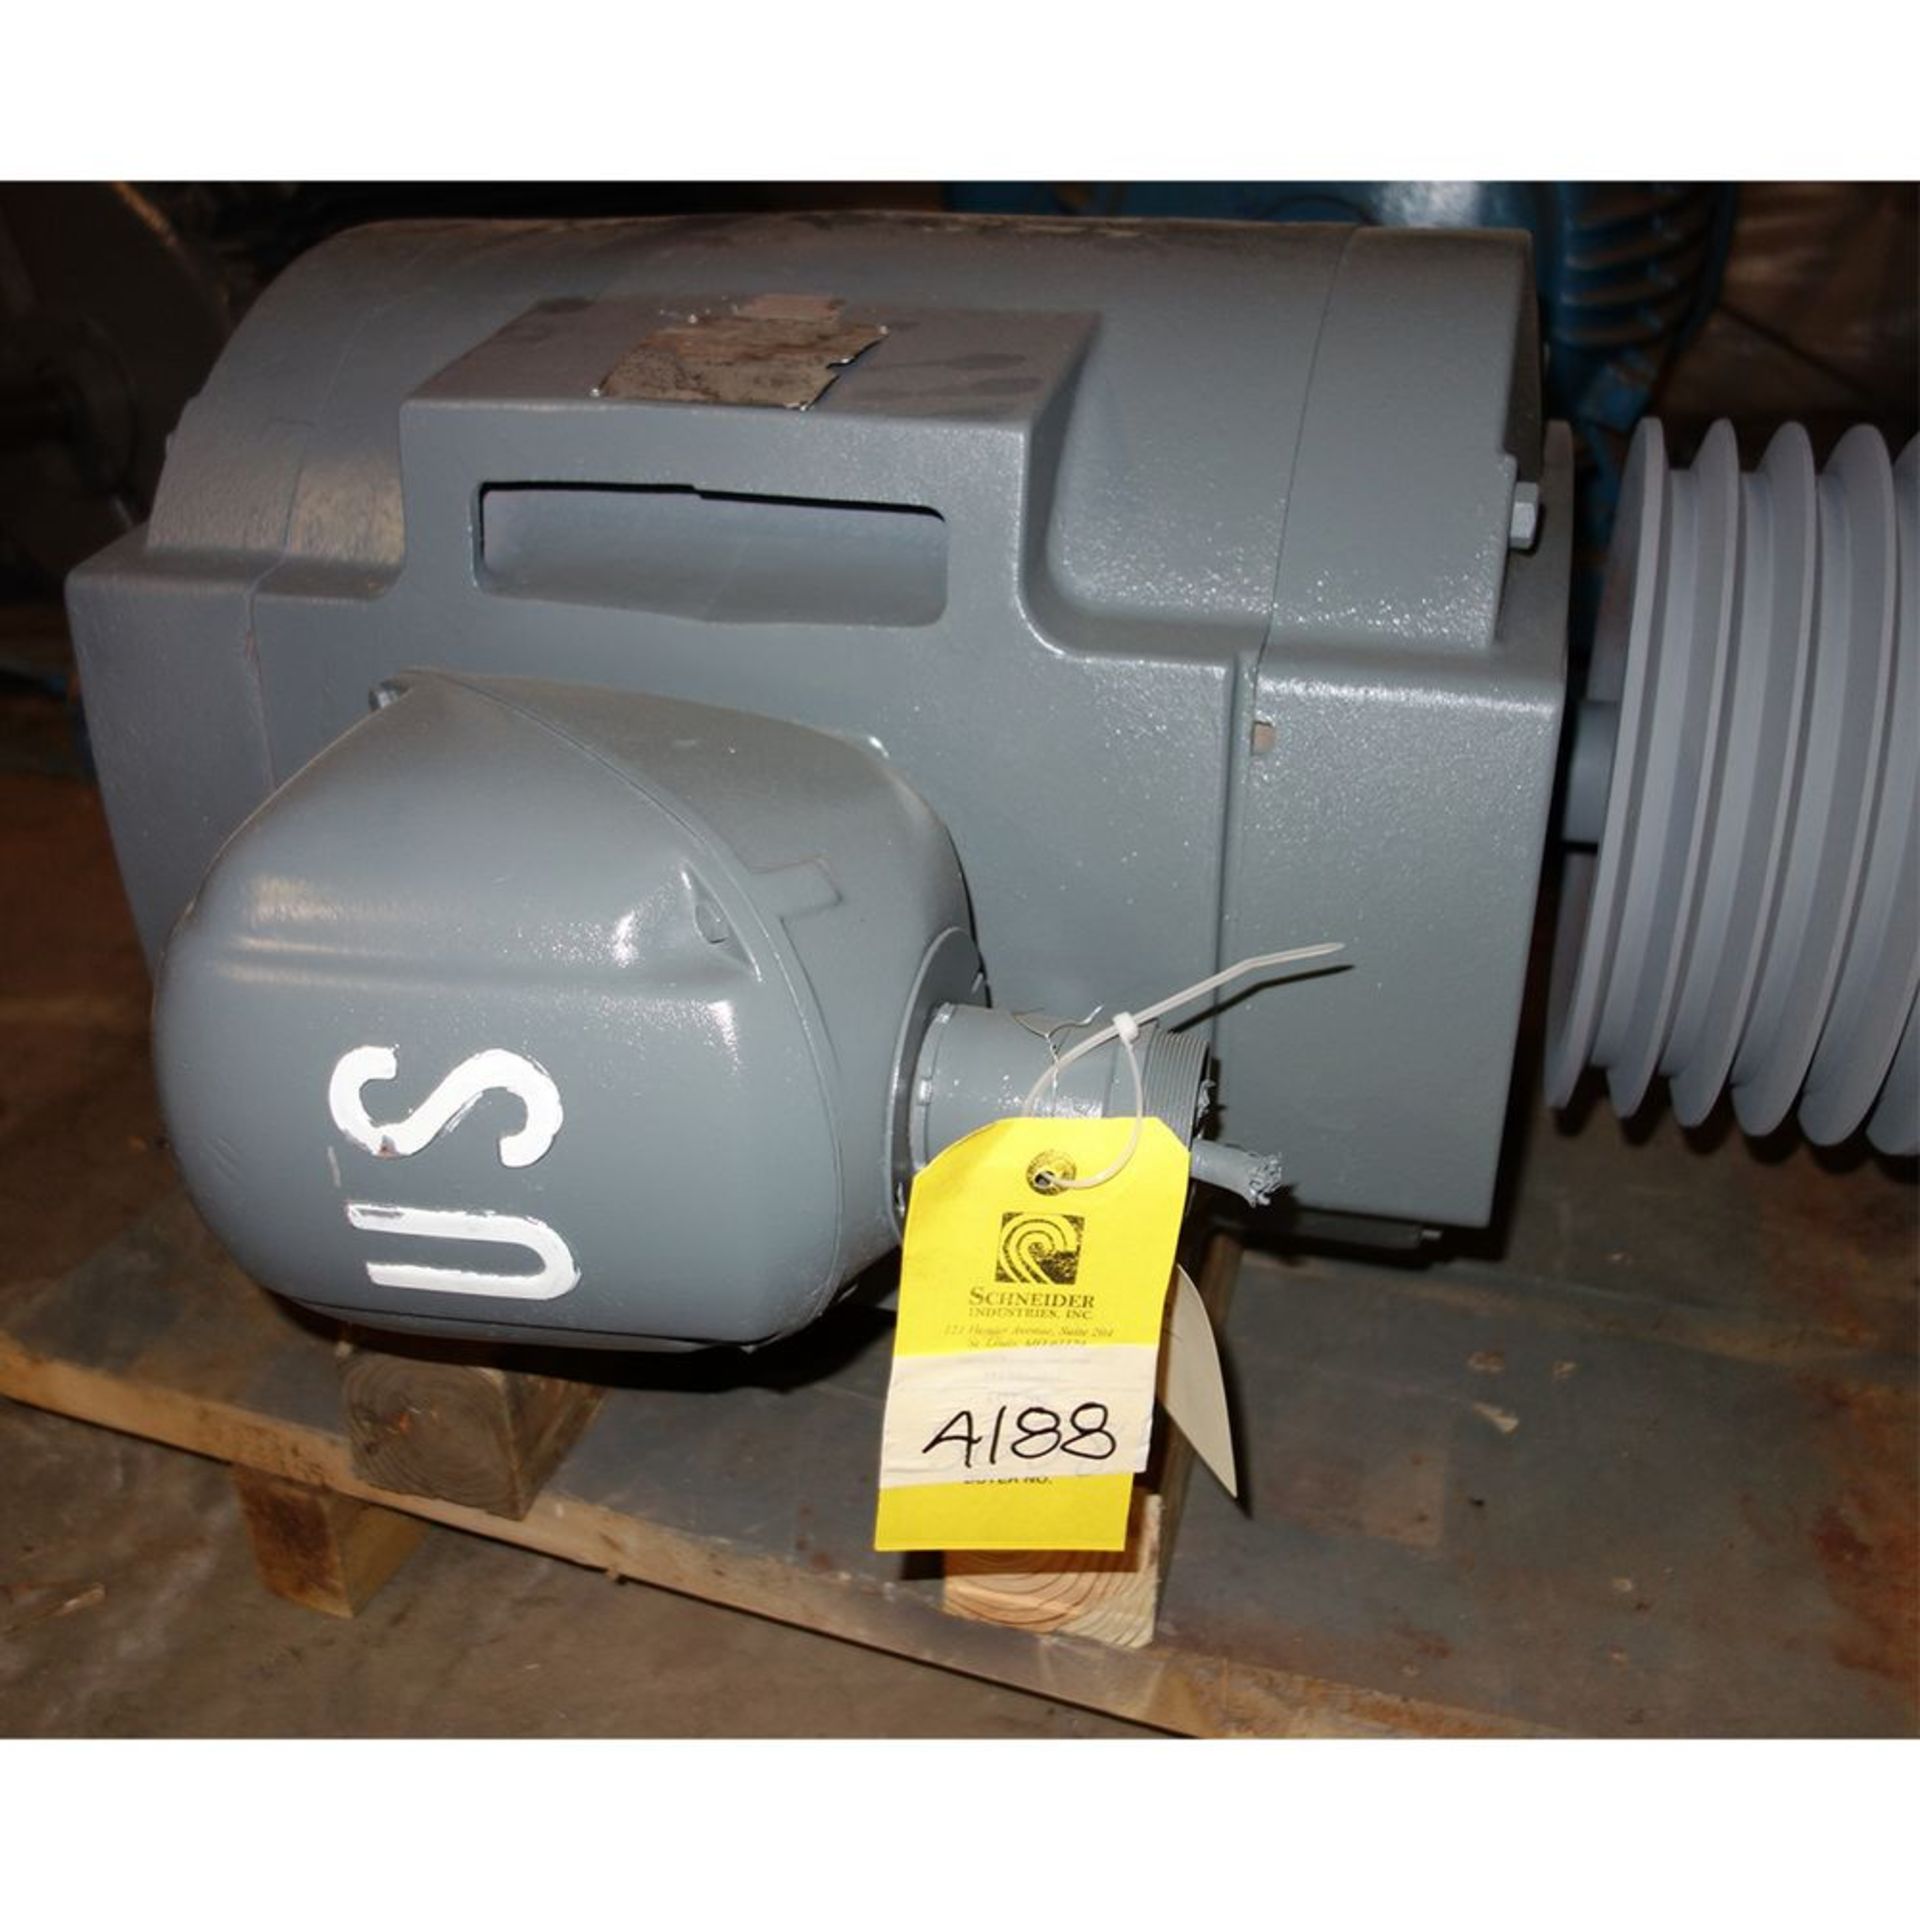 Located: Tyler, TX -- US Ekectric 60 hp motor 364T 230/460 1800rpm, load out fee $10 ***Note from